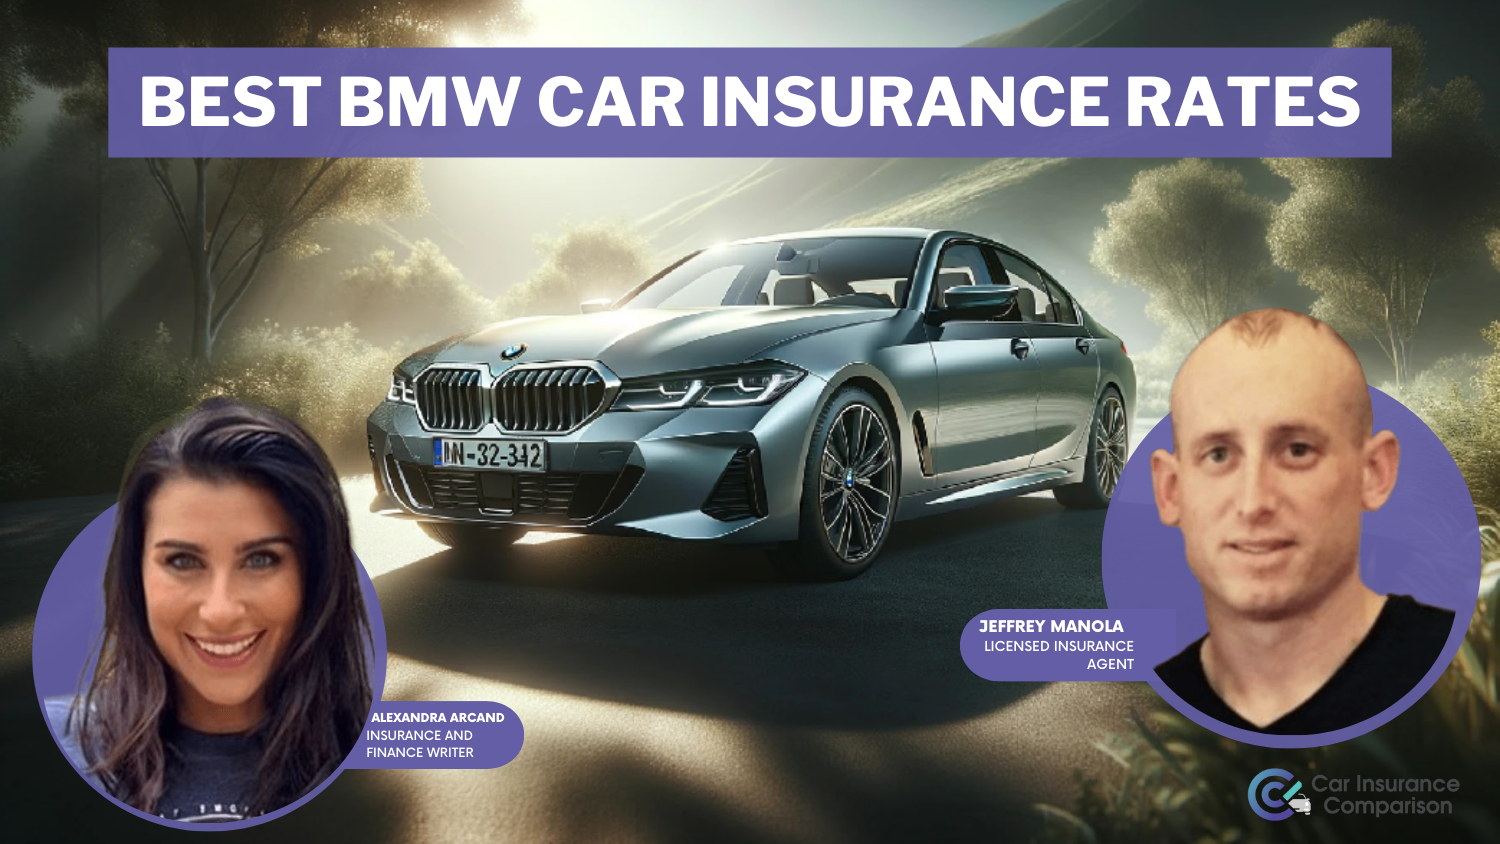 Best BMW Car Insurance Rates: State Farm, USAA, Allstate